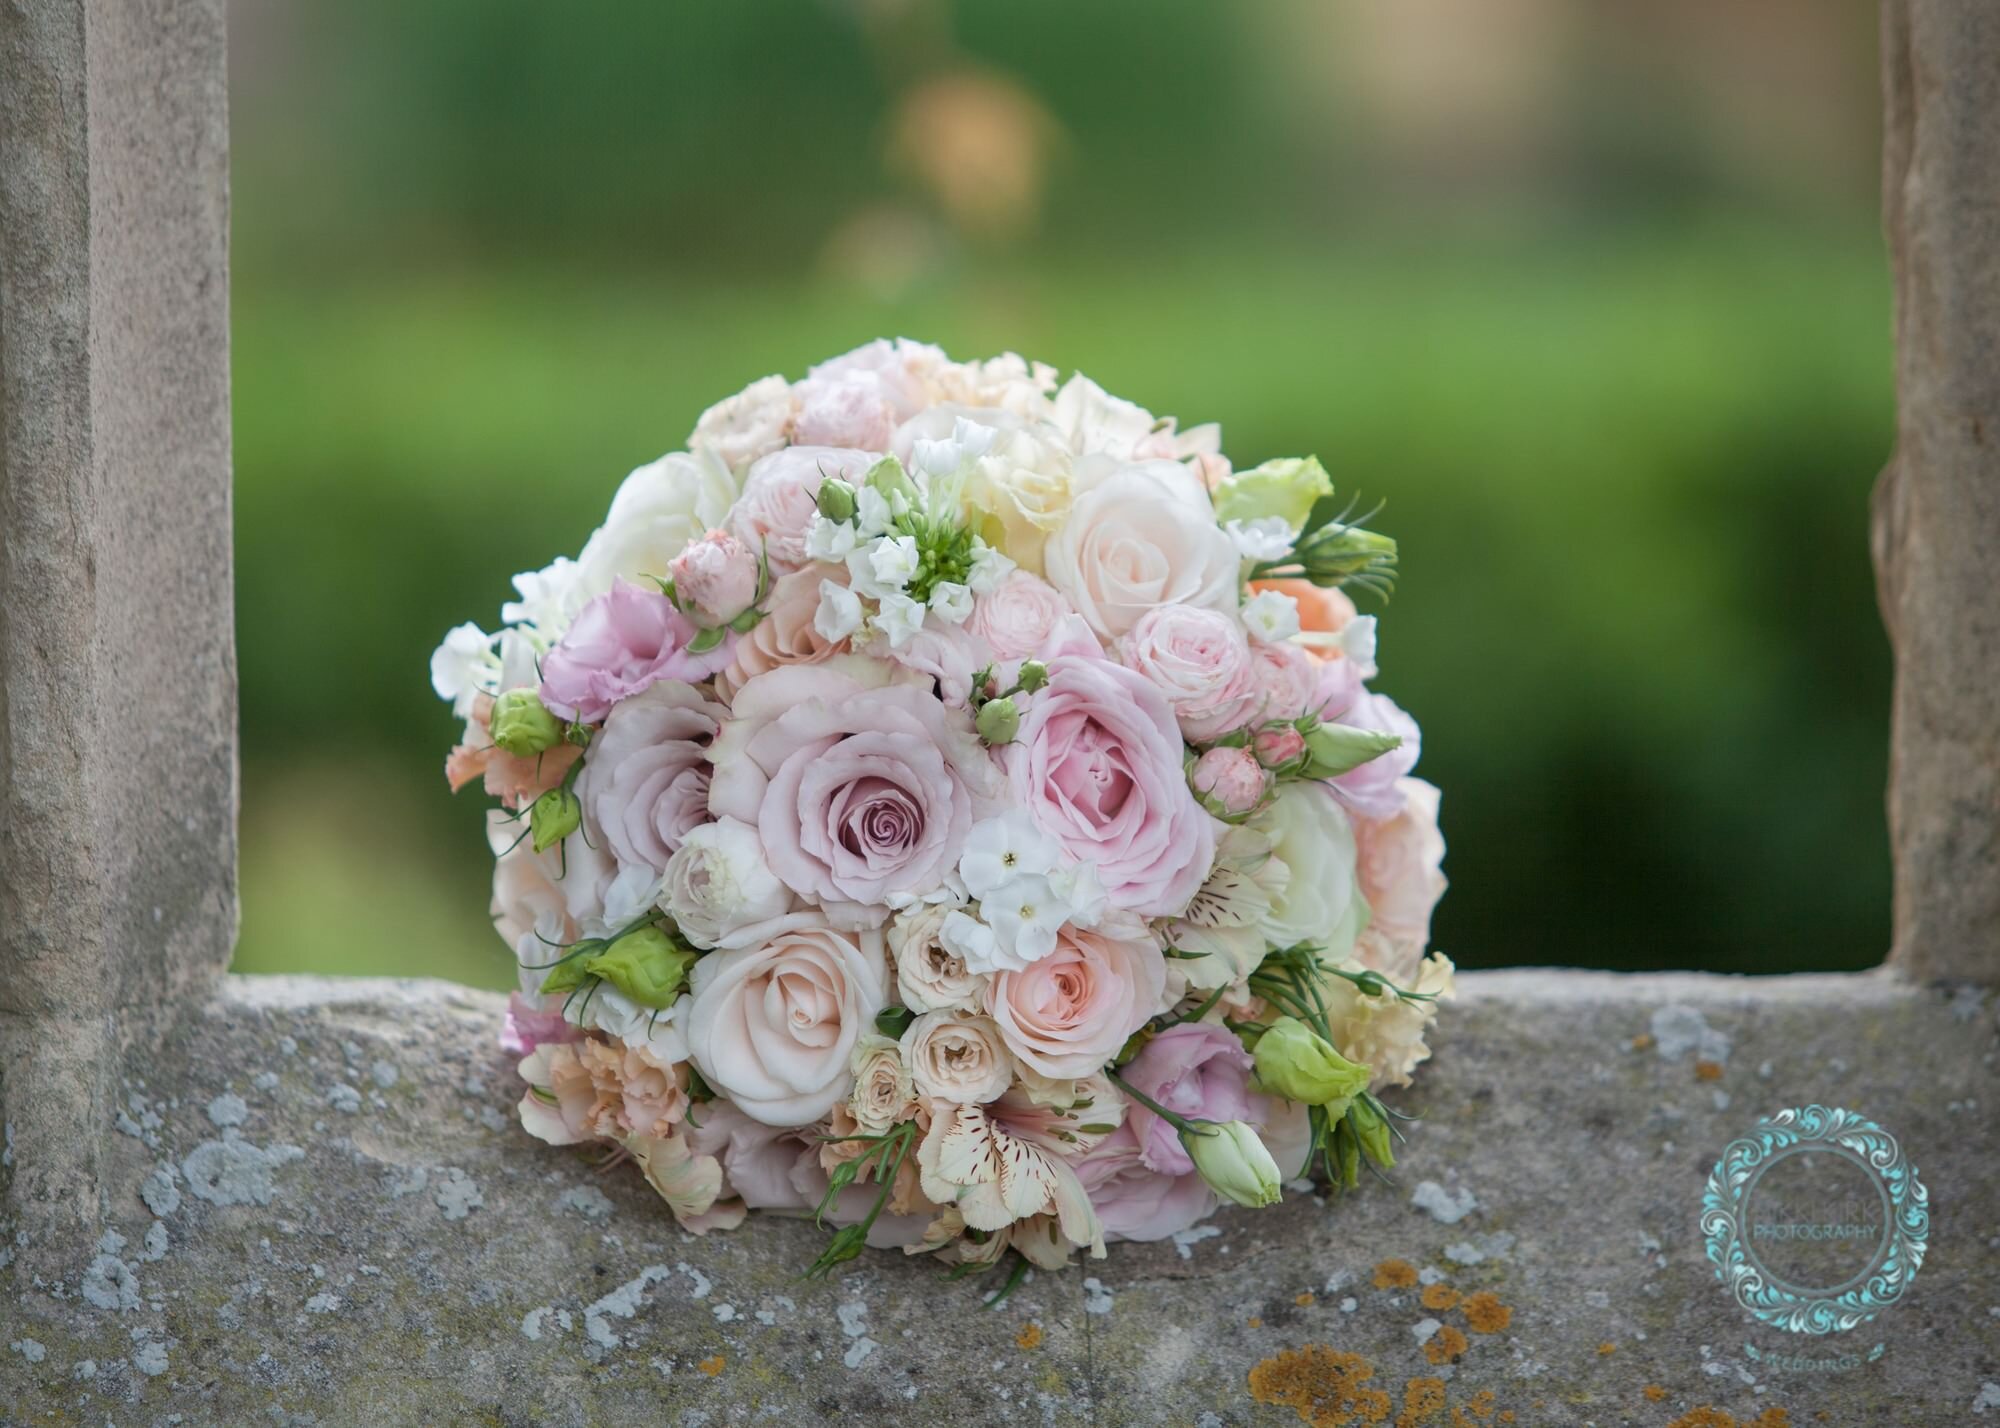 Sudeley-Castle-Cotswolds-Wedding-Award-Winning-Wedding-Planner-Planned-for-Perfection-13a.jpg